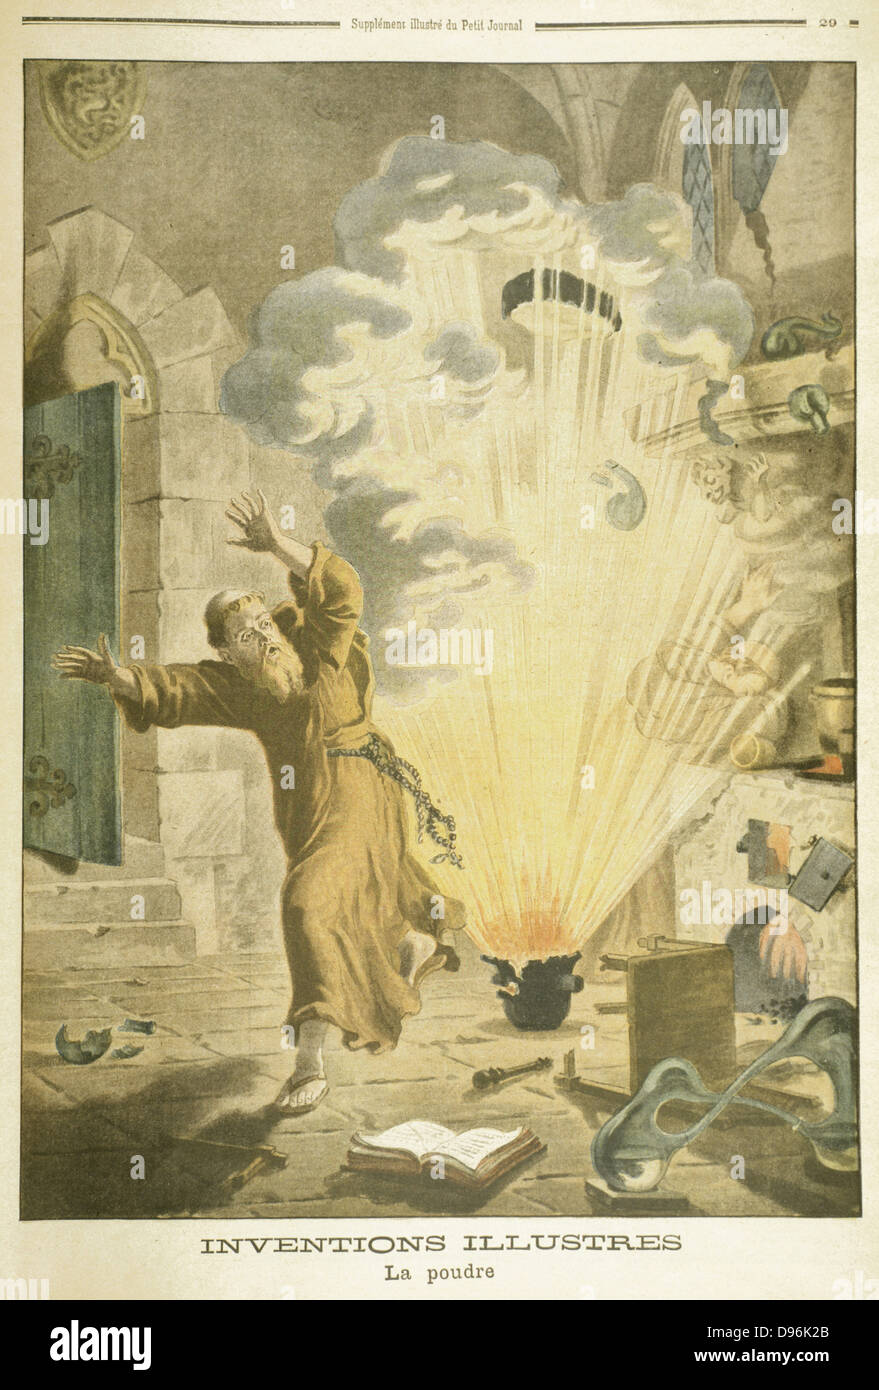 Berthold Schwarz (active 1320). German Franciscan monk and alchemist, supposed to be the first European to discover Gunpowder. Illustration from Le Petit Journal,  Paris, 1901 Stock Photo